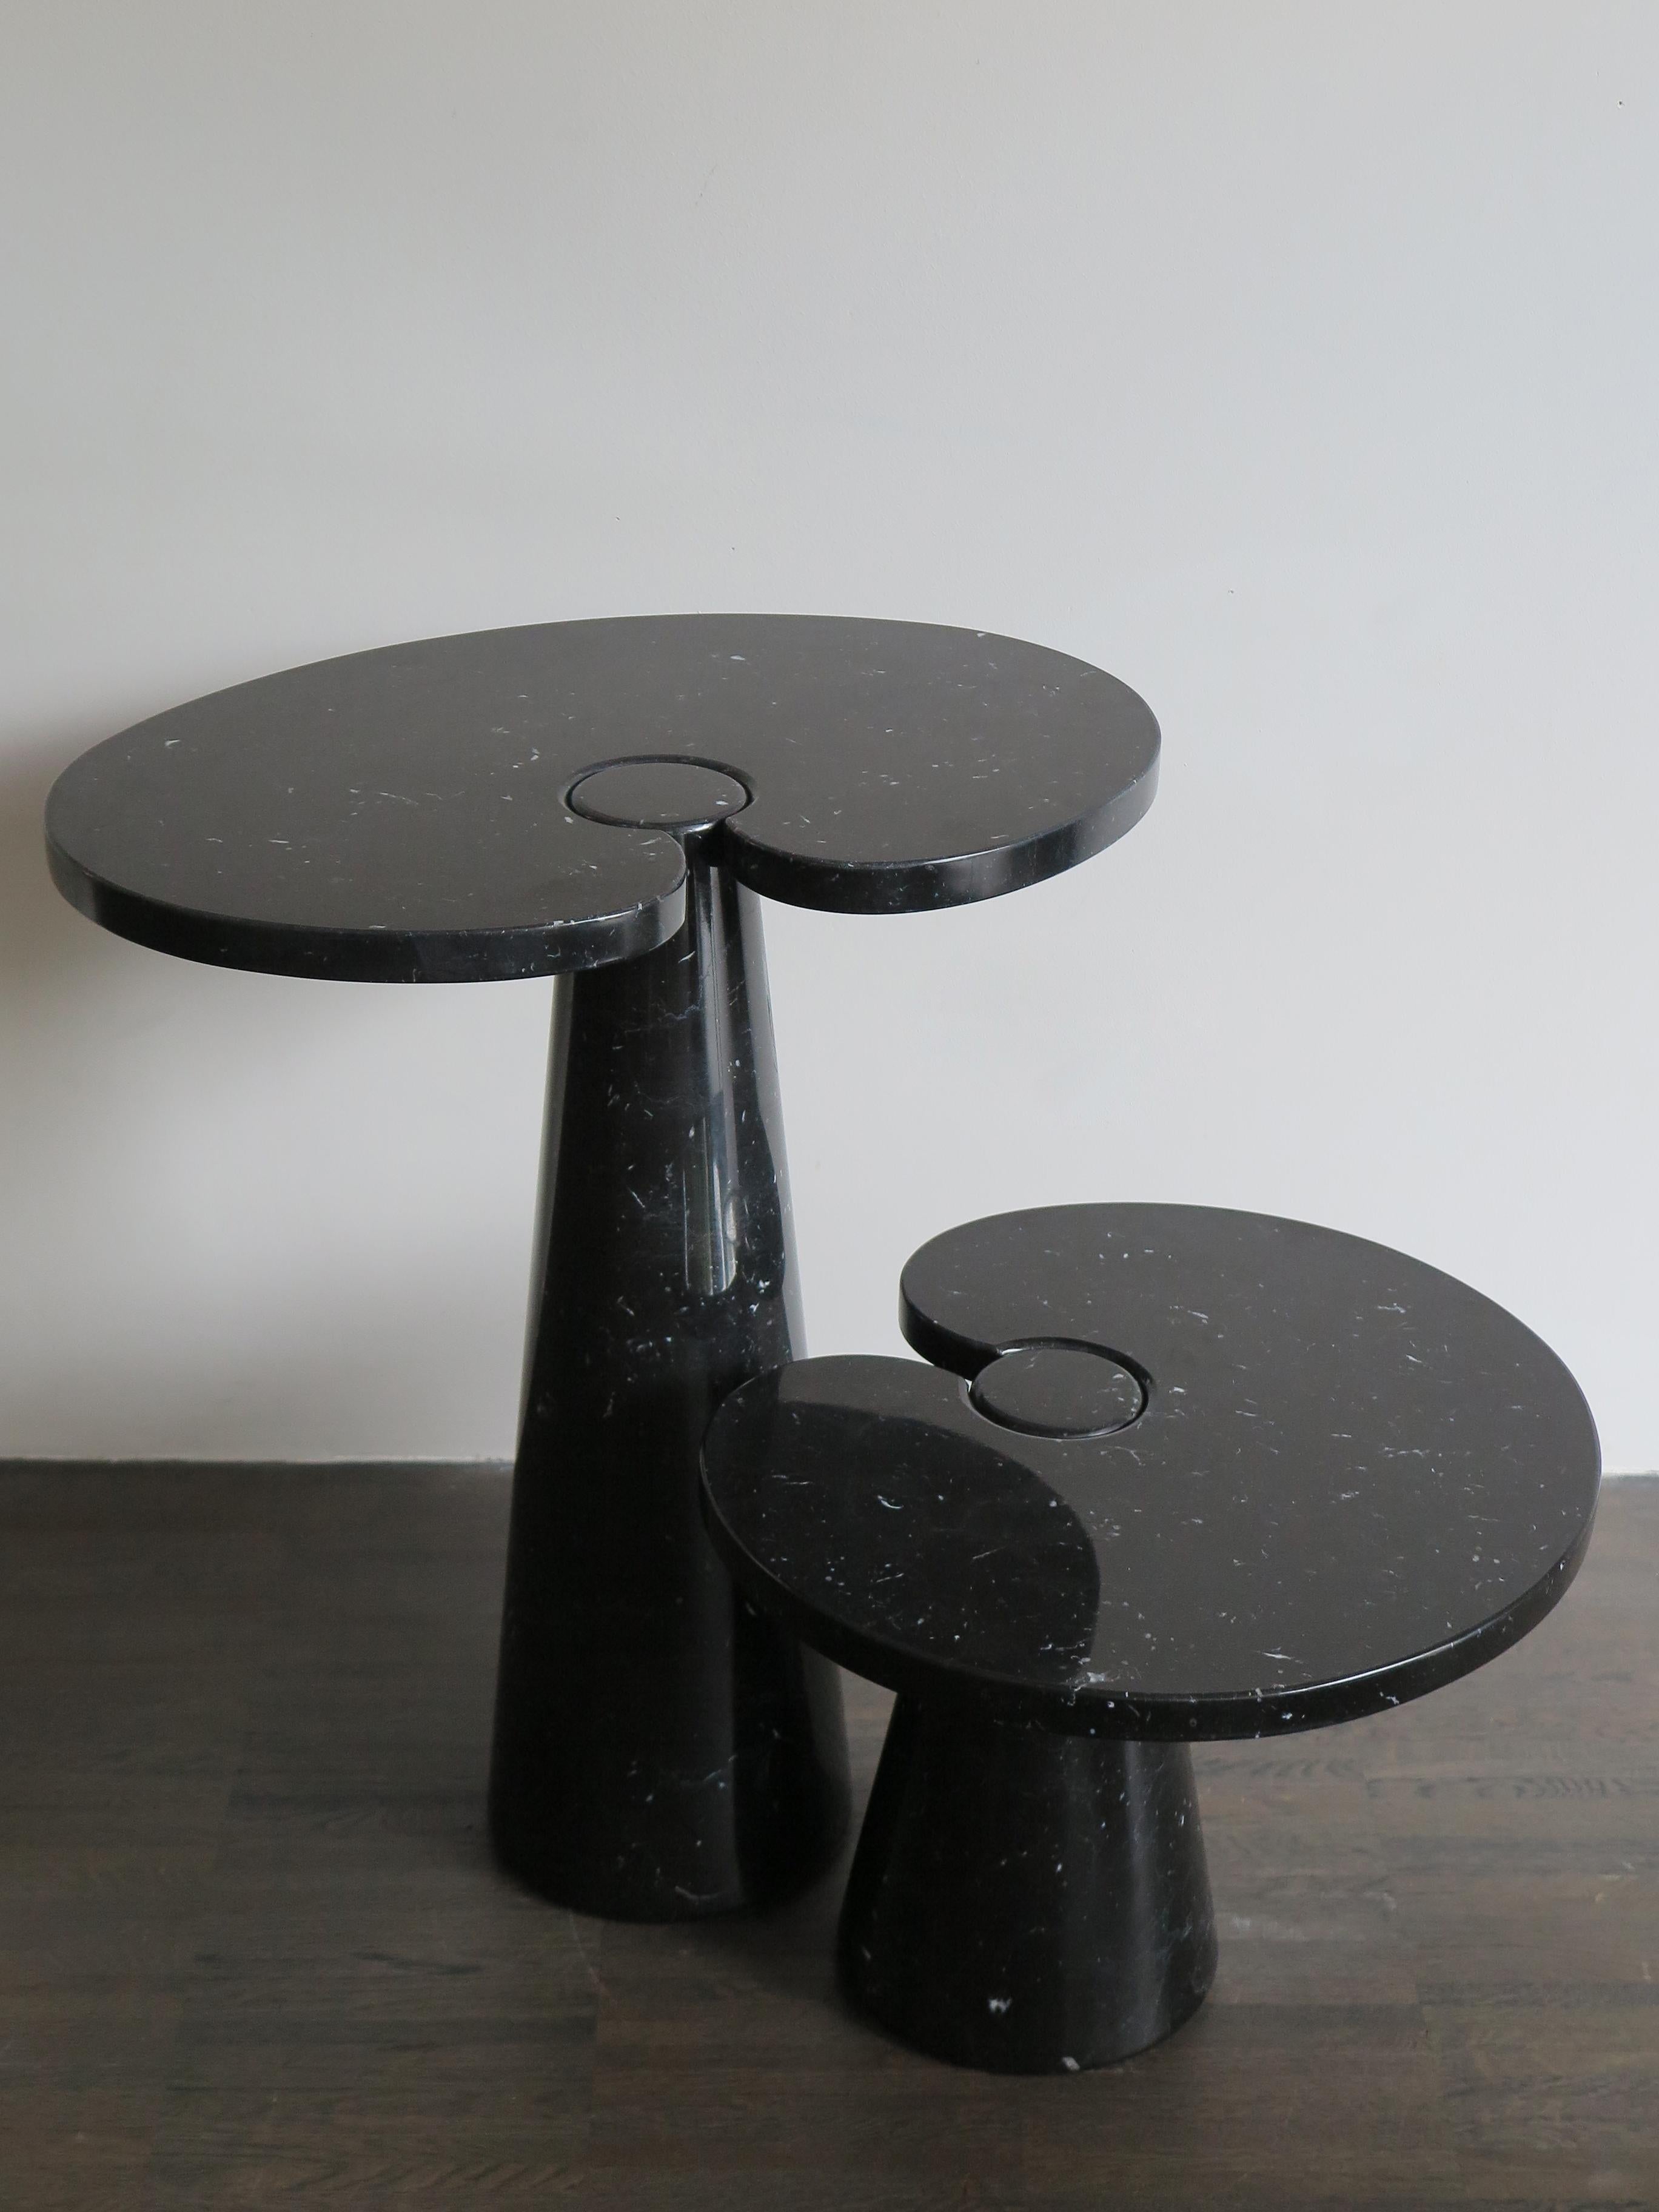 1970s couple of two side tables, Eros series, designed by Angelo Mangiarotti for Skipper in black Marquina marble.
The structural design of the Eros tables incorporate a gravity-based embedding between the table top and leg made possible by the